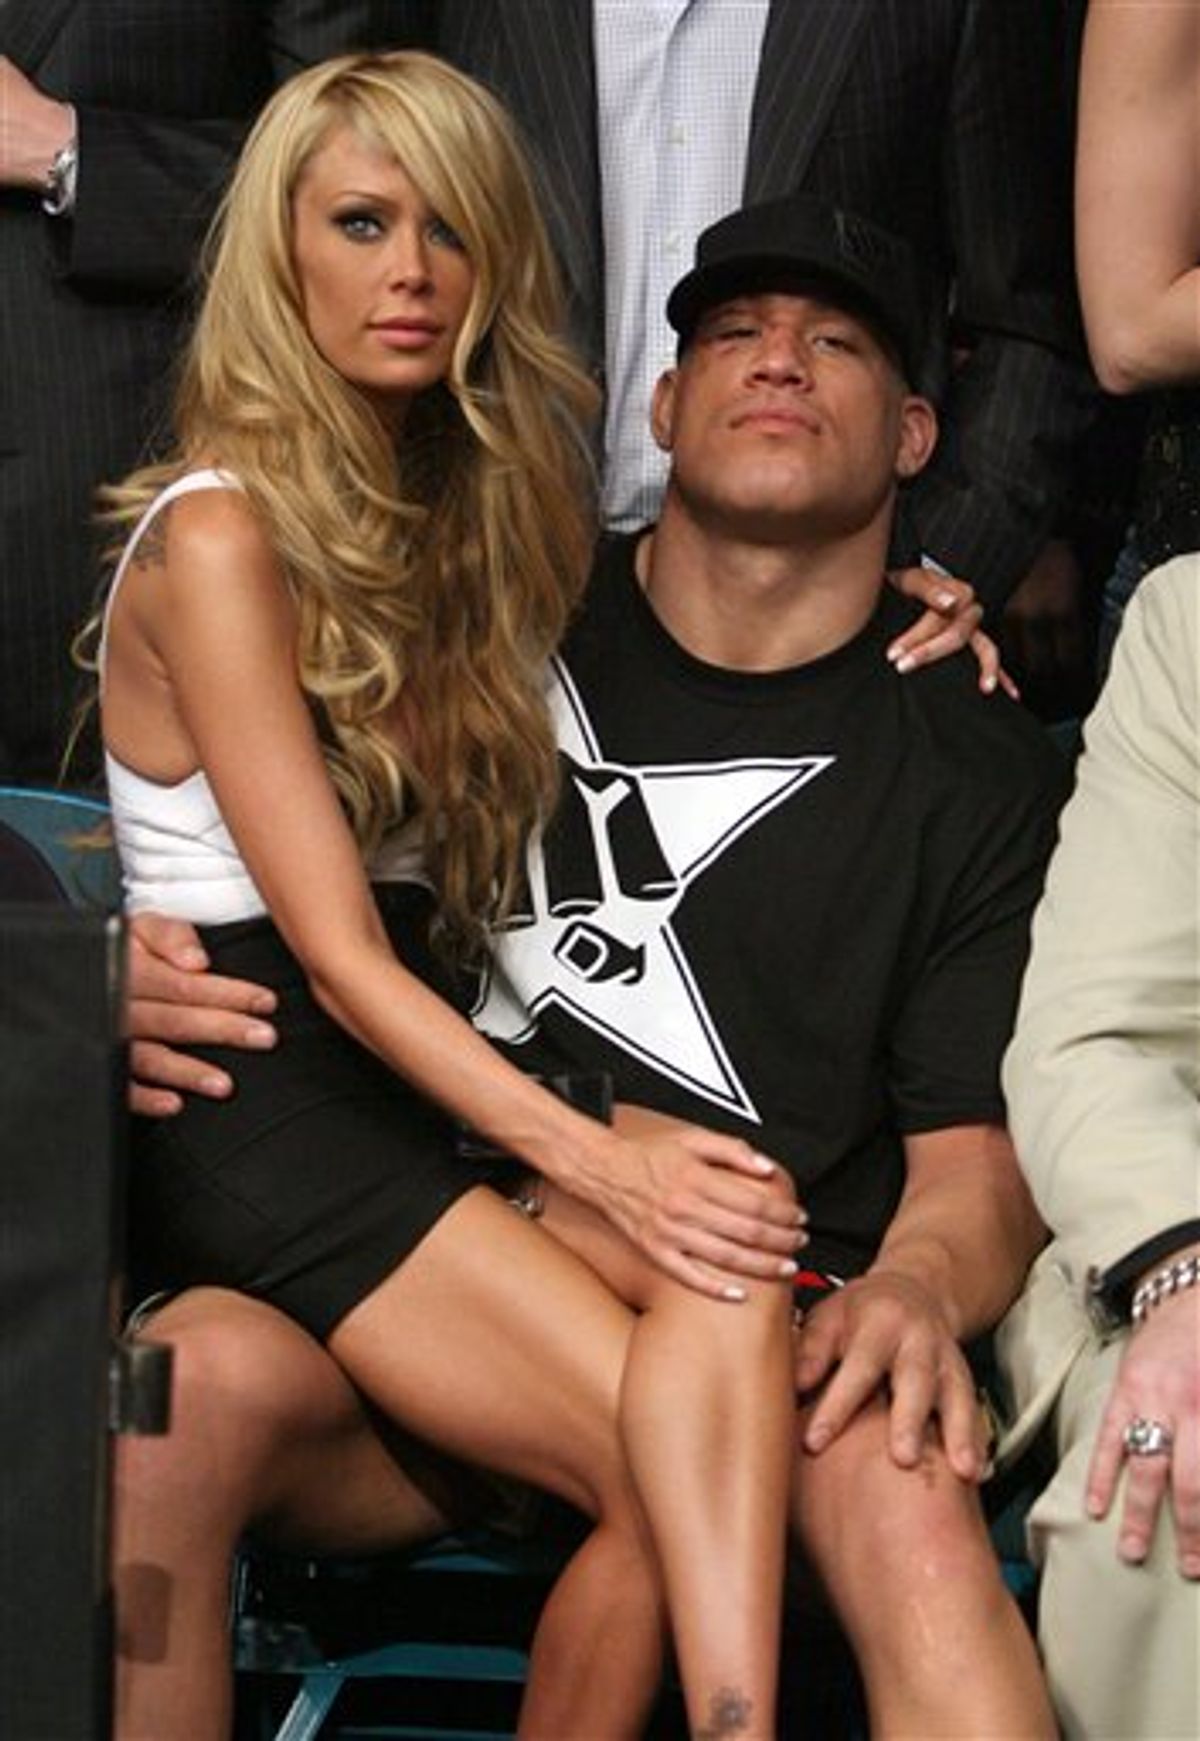 FILE - In this May 24, 2008 file photo, mixed martial arts star Tito Ortiz, right, is seen with Jenna Jameson after his fight at UFC 84 at the MGM Grand Garden Arena in Las Vegas. Ortiz was arrested on suspicion of domestic violence Monday, April 26, 2010, at the home he shares with Jameson. (AP Photo/Eric Jamison, File) (AP)